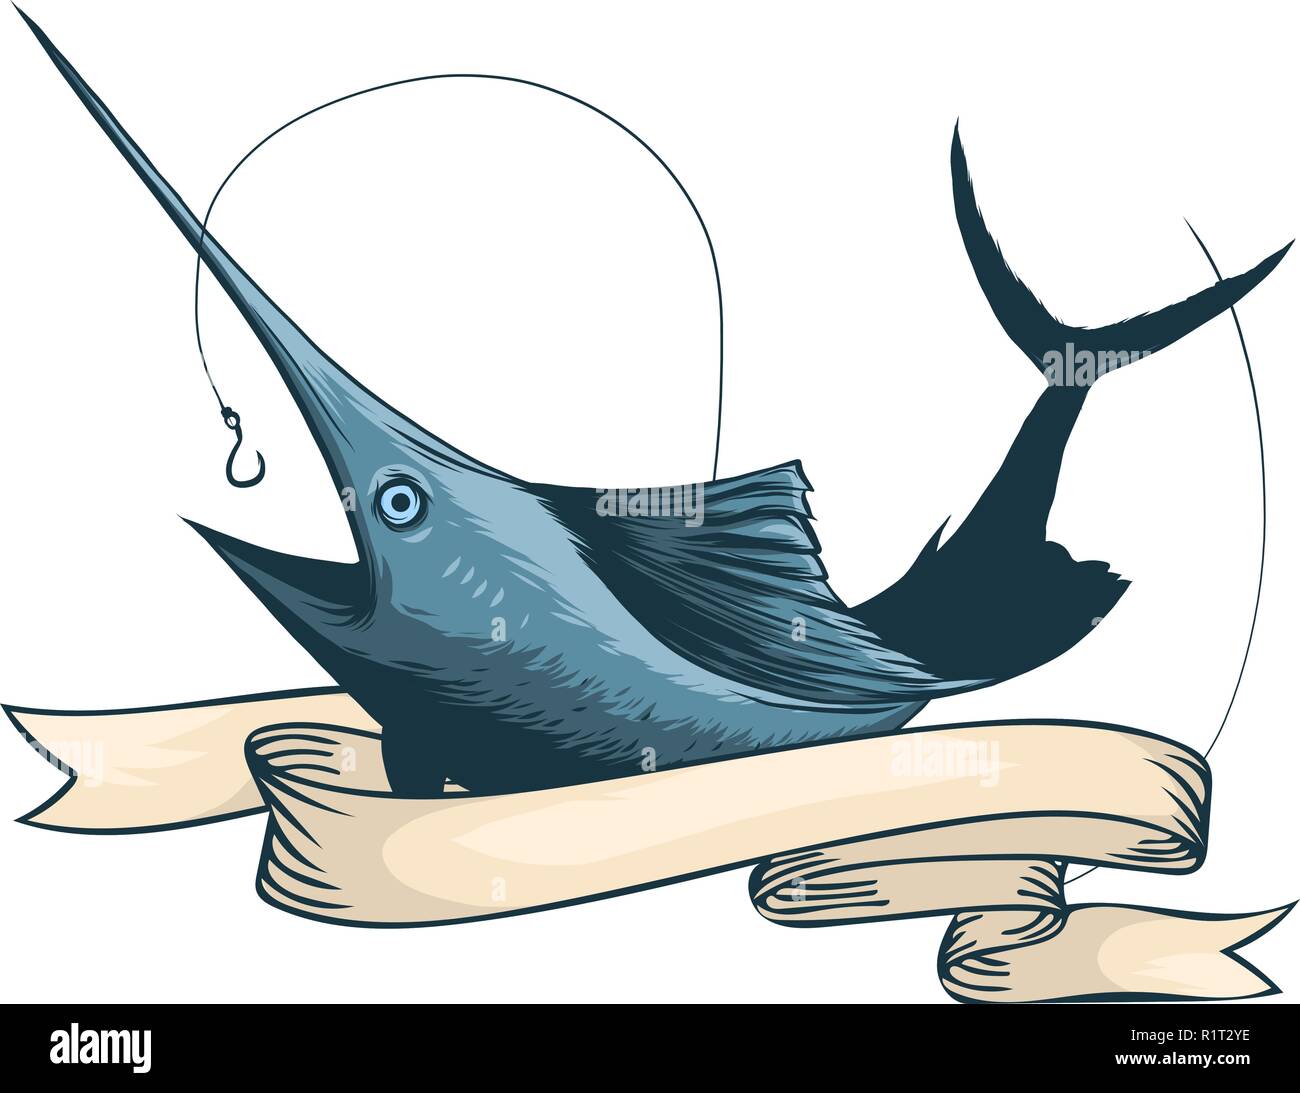 Marlin fish logo. Sword fishing emblem for sport club. Angry fish background theme vector illustration. Stock Vector